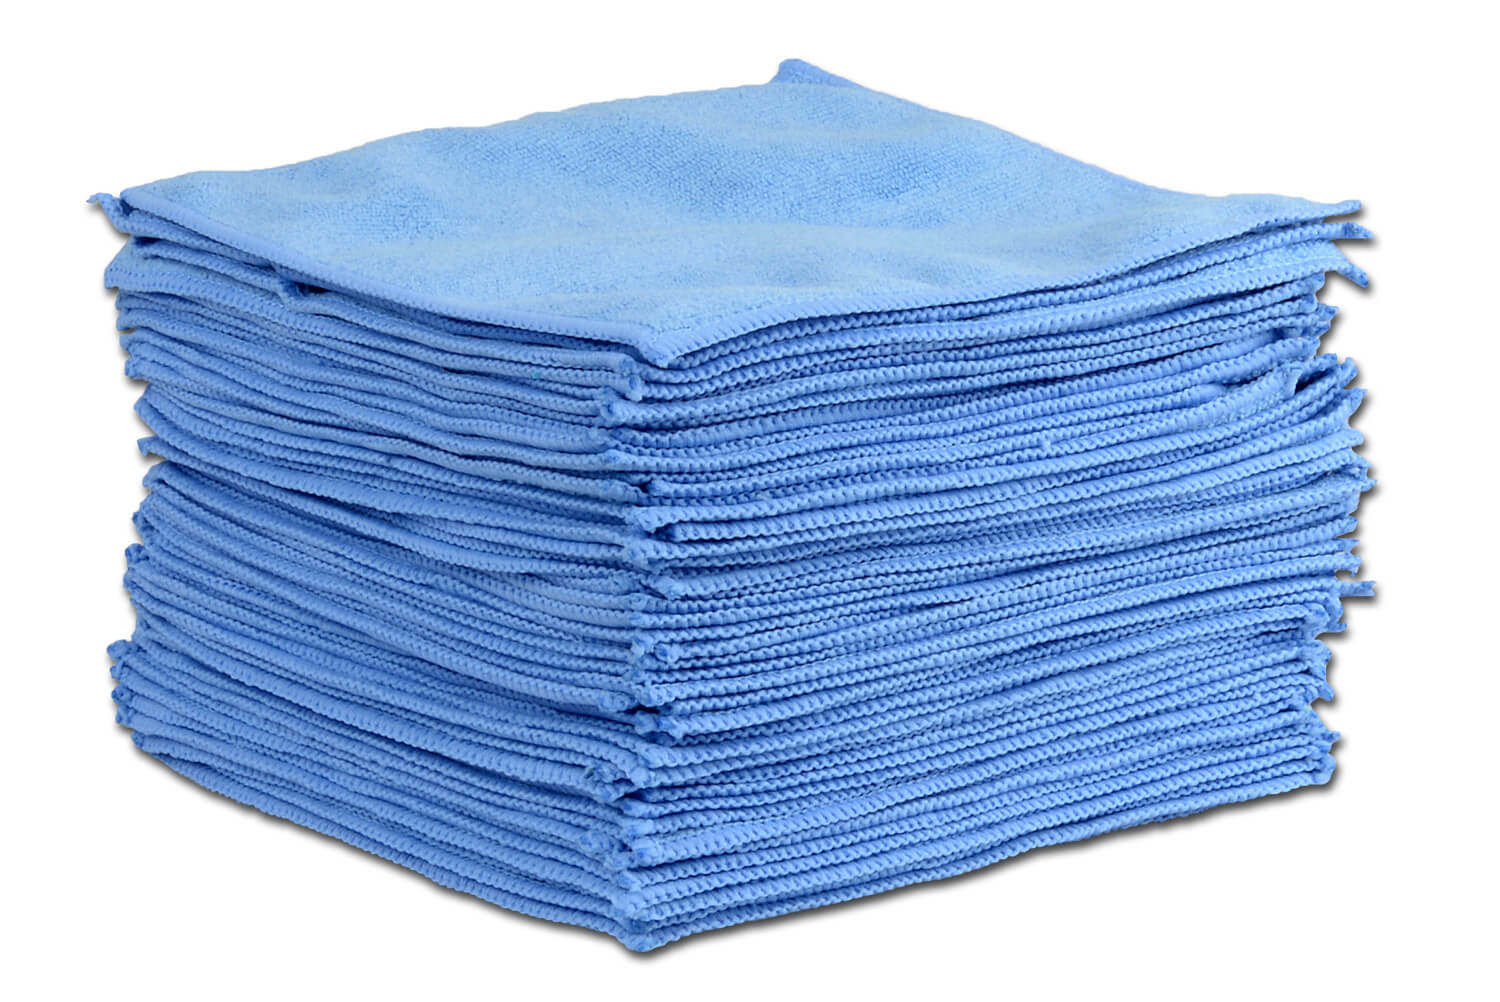 16 x 16 Economy All Purpose Microfiber Towels - 50 Pack - Reusable Wash  Cloths, Dust, Kitchen, Car, Shop Rags for Cleaning (Blue)